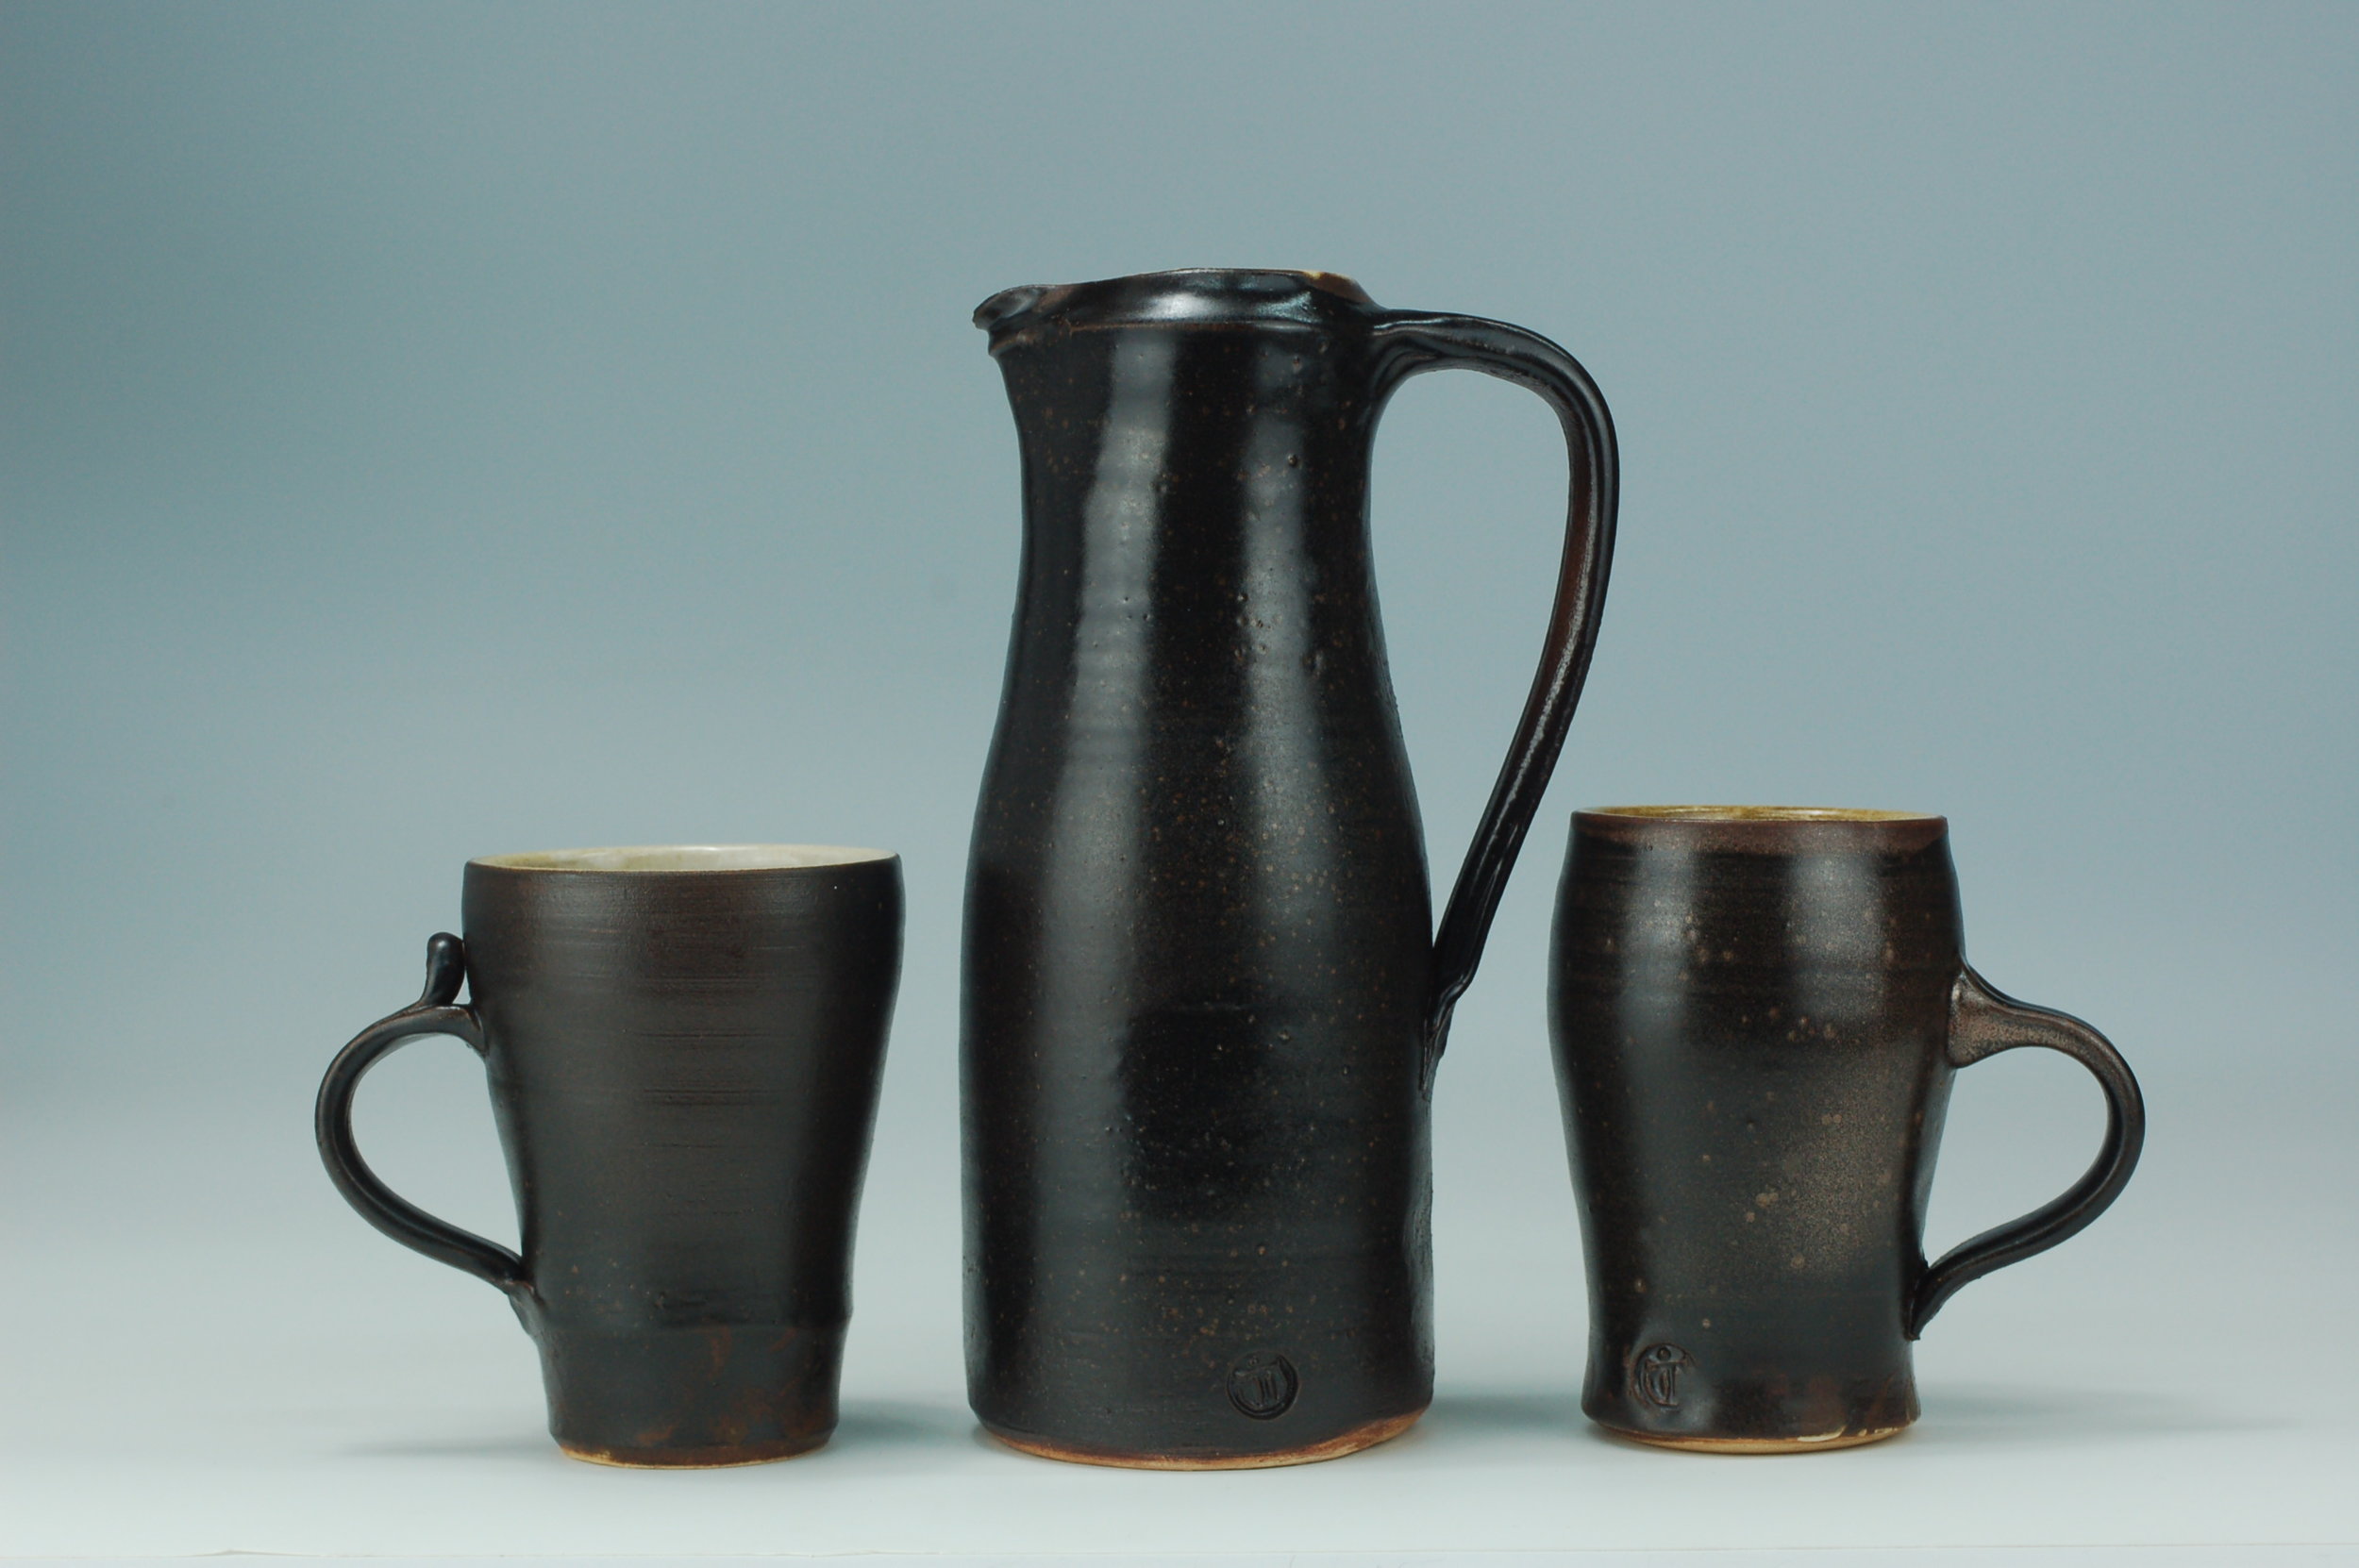 Pitcher in the style of Leach Pottery and mugs